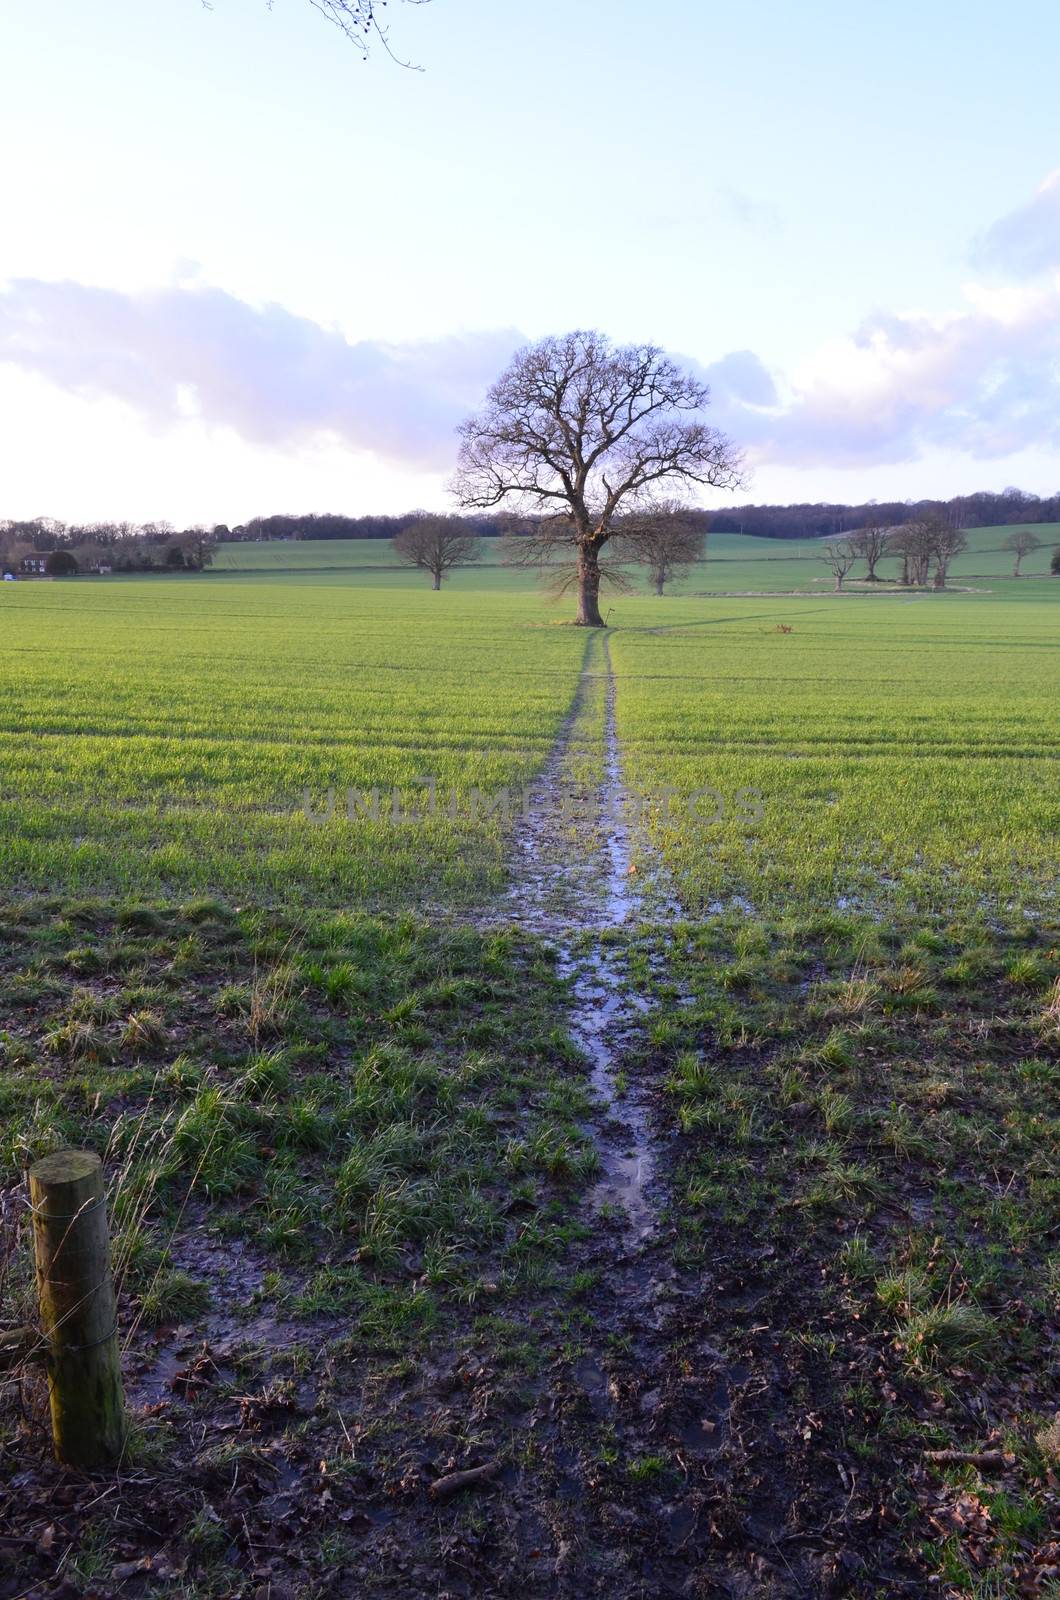 England during Winter and a farmers field is drenched due to weeks of heavy rain.